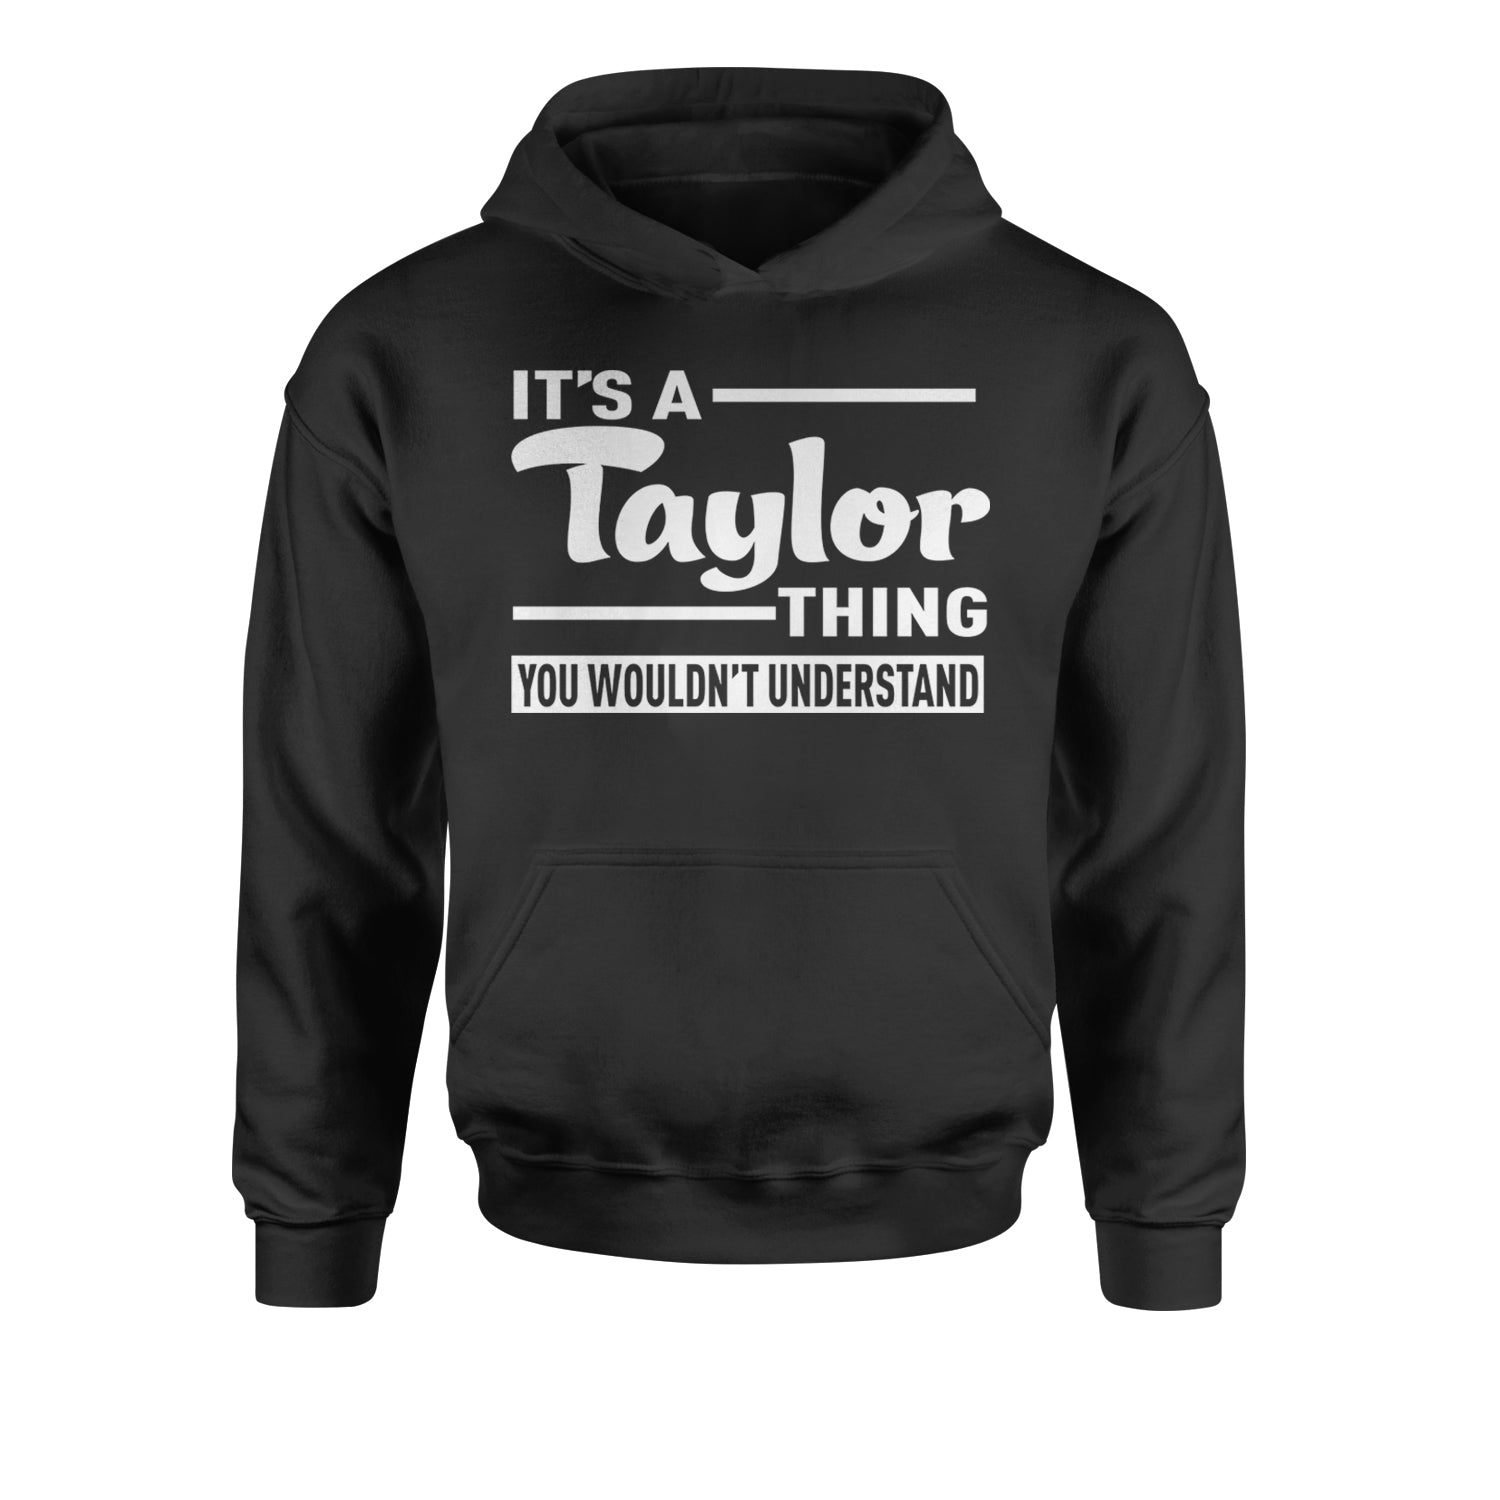 It's A Taylor Thing, You Wouldn't Understand TTPD Youth-Sized Hoodie